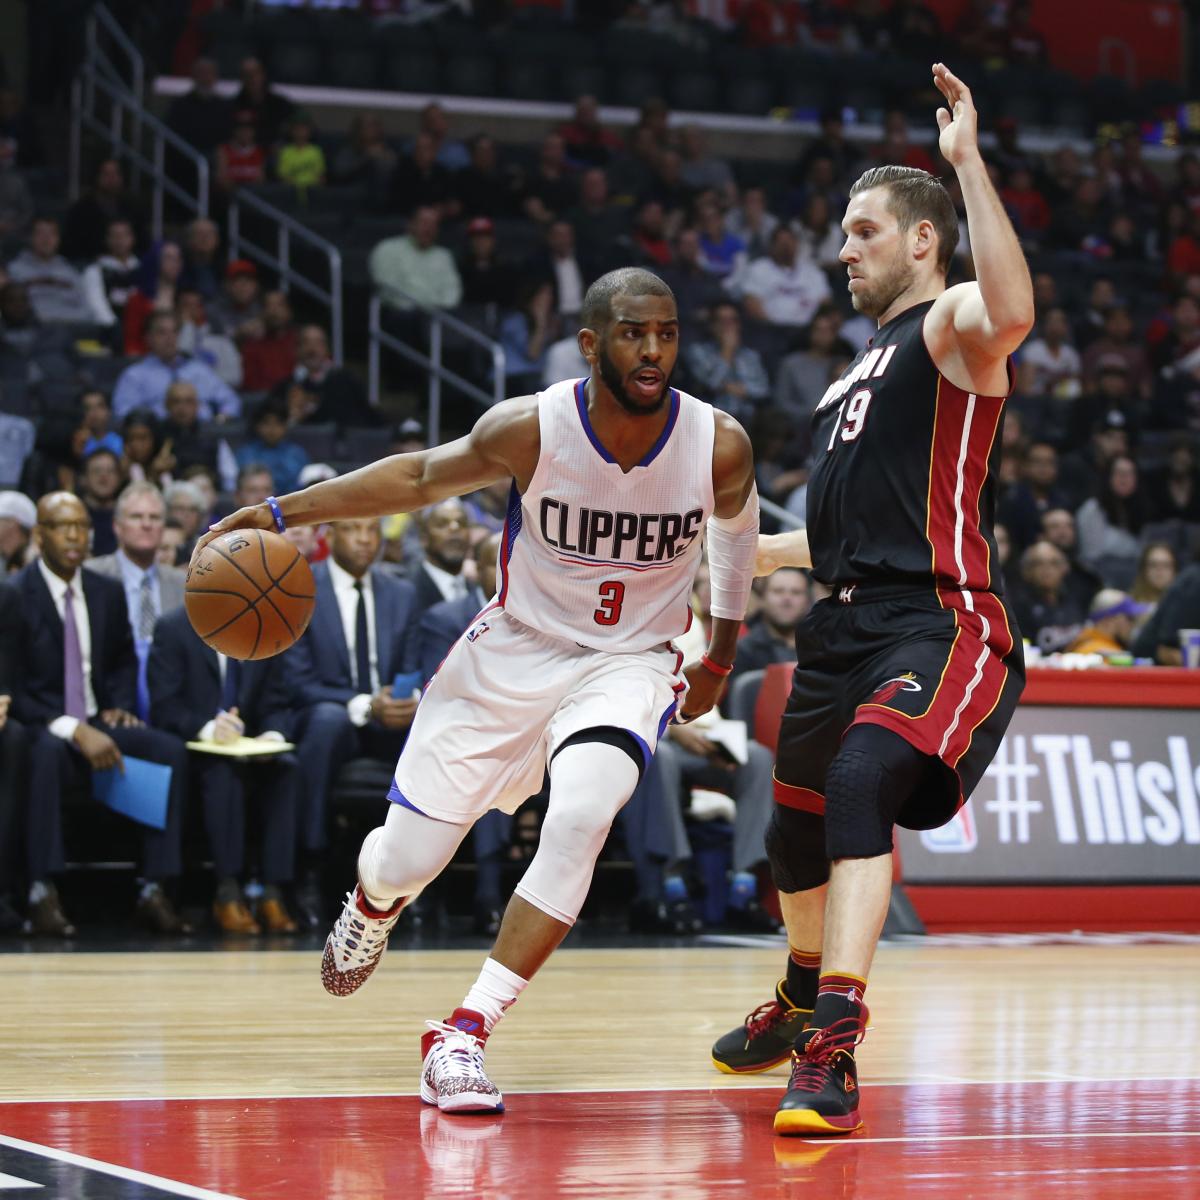 Heat vs. Clippers Score, Video Highlights and Recap from Jan. 13